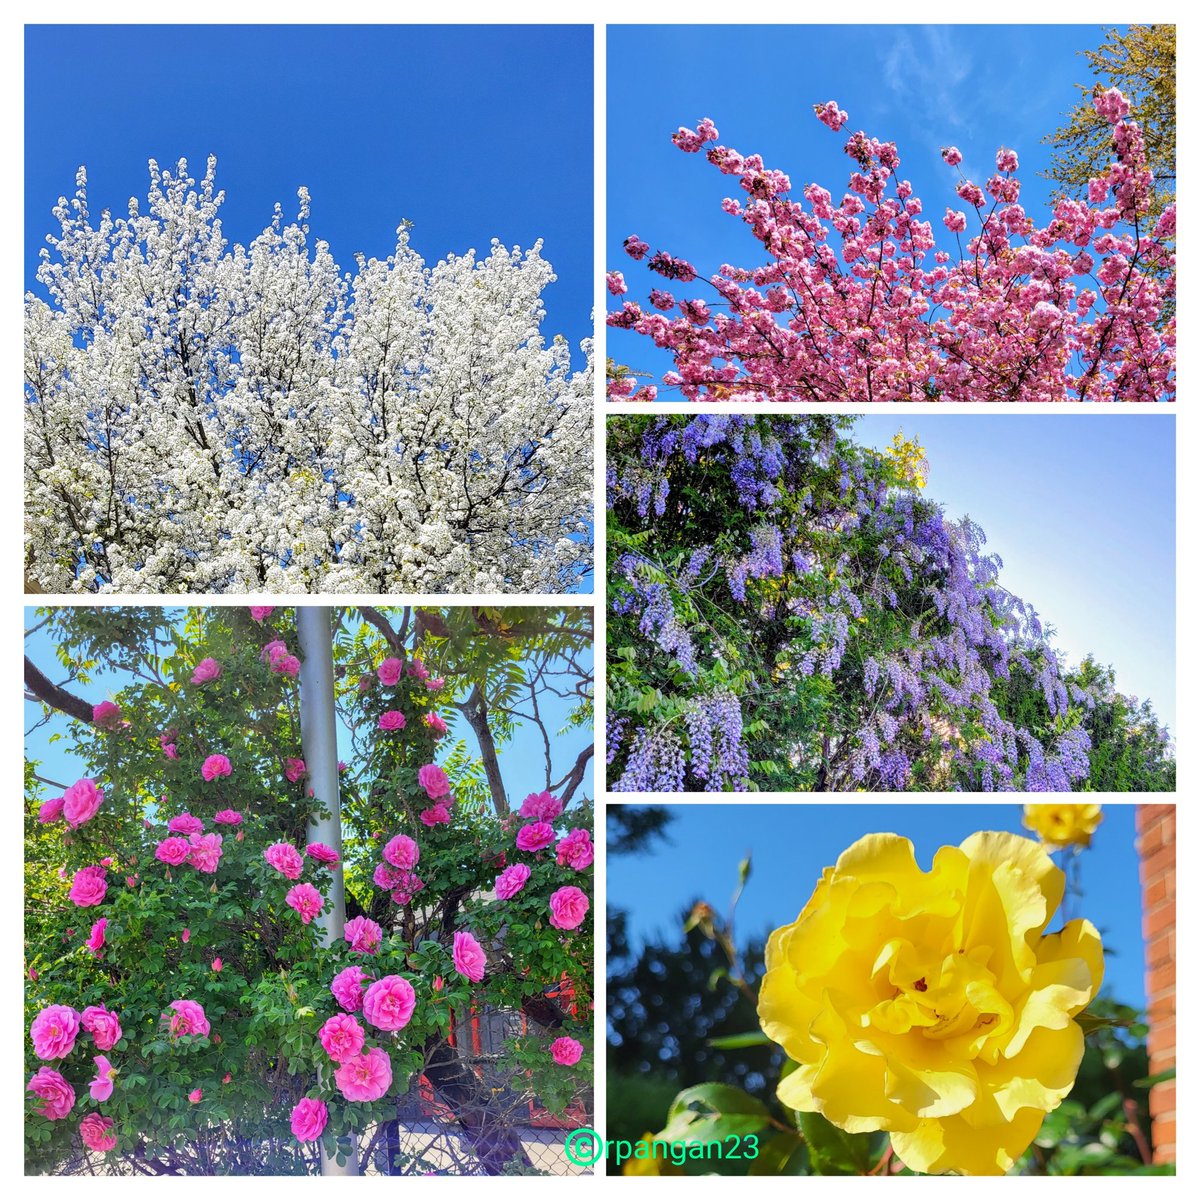 White, pink, lavender and yellow flowers under cloudless blue skies. #TuesdayBlue #Flowers #garden #NatureBeauty #GardenersWorld